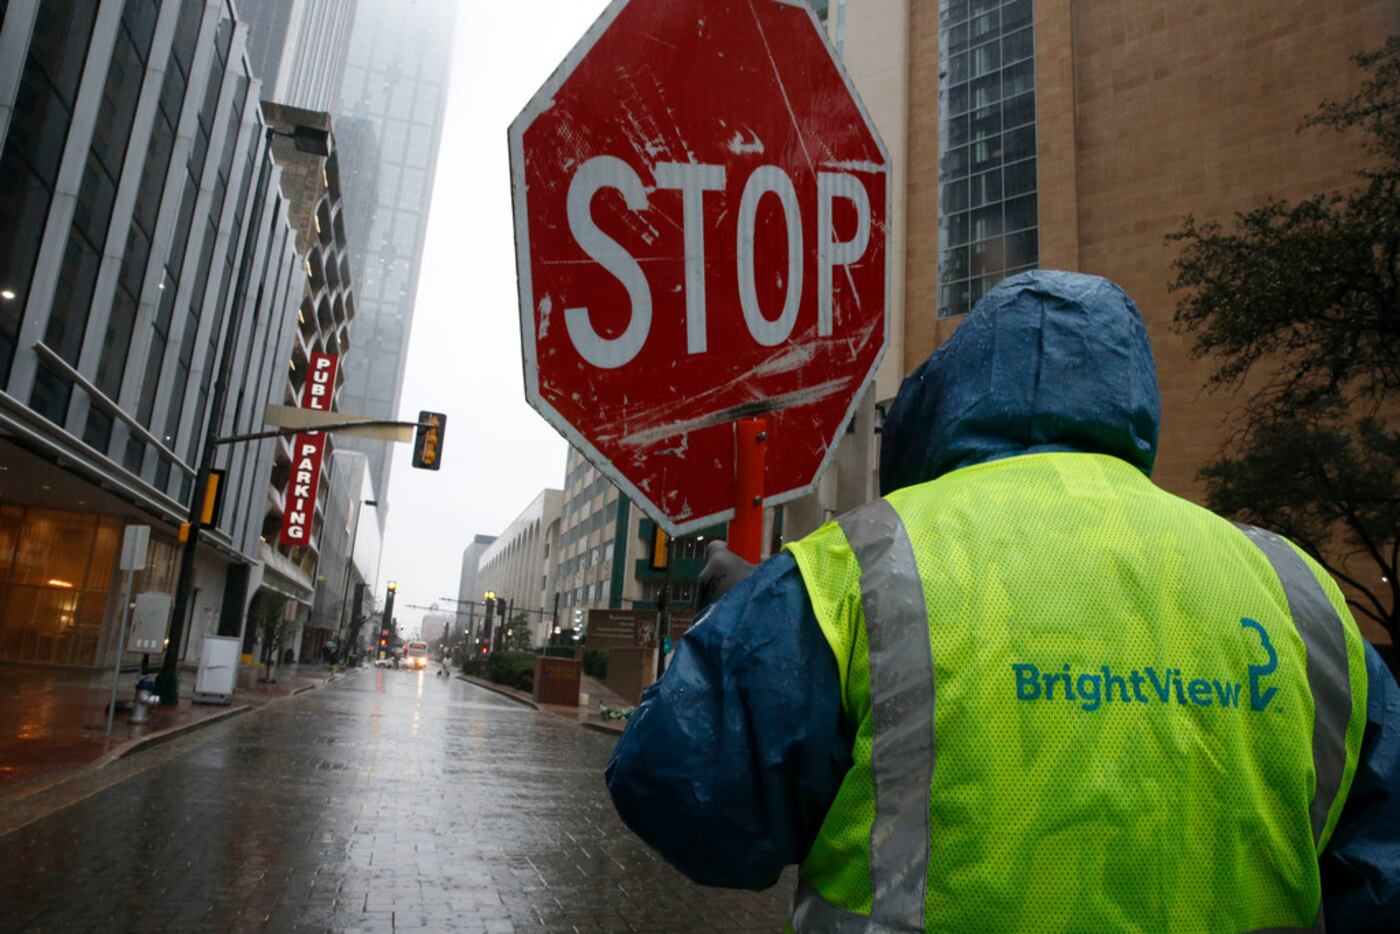 A construction worker stops traffic during a rainy week in downtown Dallas.